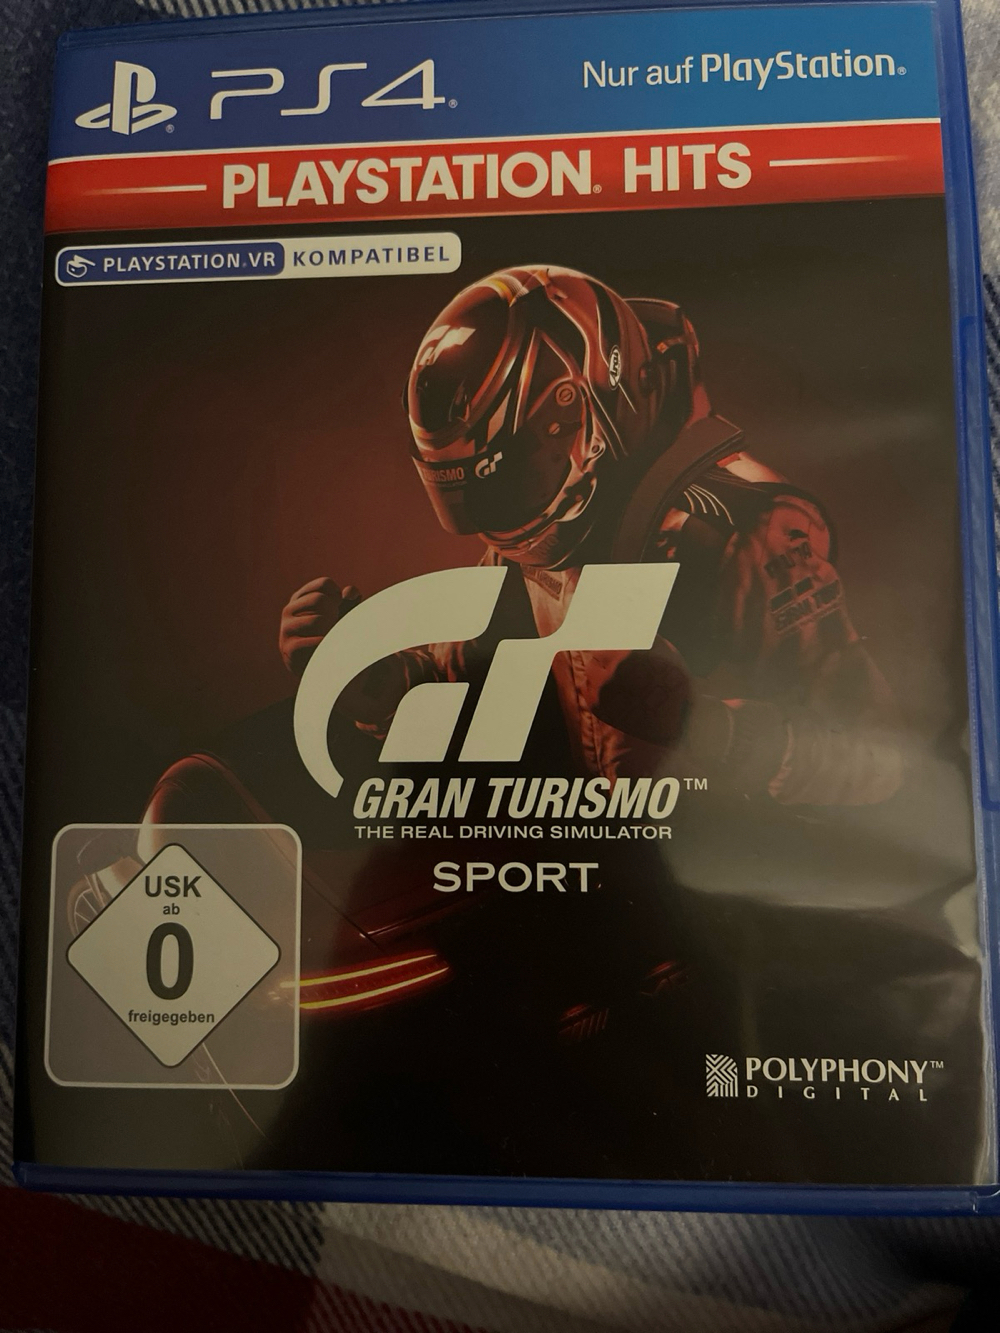 PS 4 Spiel GT Gran Turismo the real driving simulator 